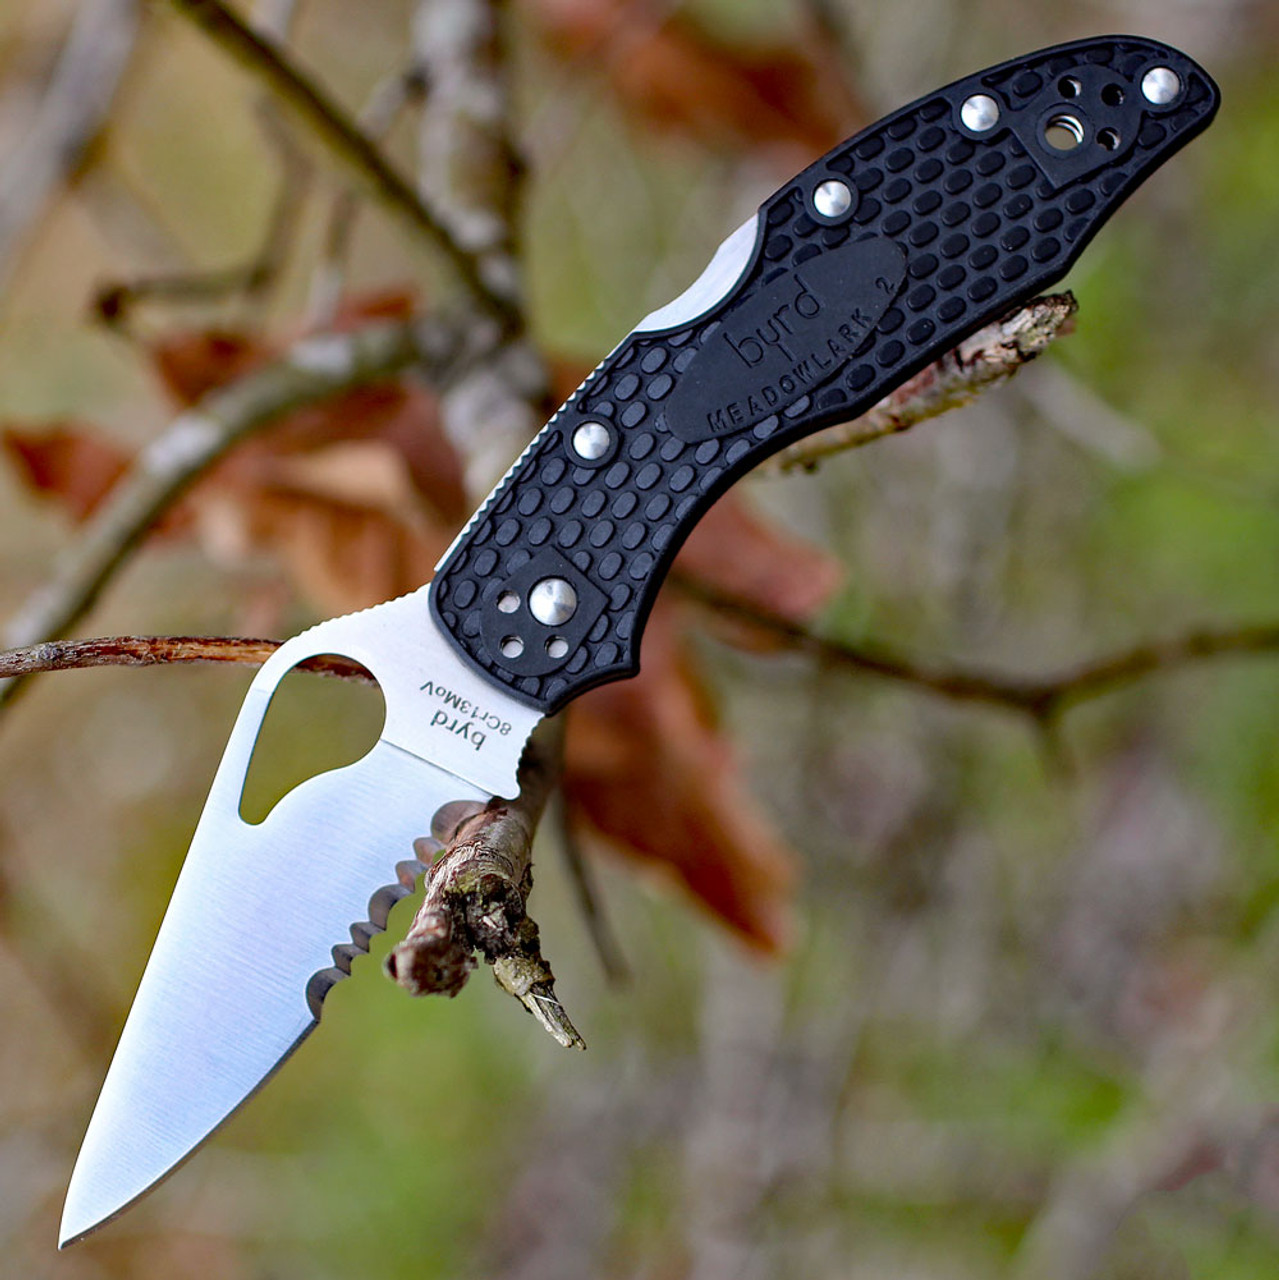 Byrd Meadowlark 2 (BY04PSBK2) 2.97" 8Cr13MoV Satin Drop Point Plain Blade, Gray Stainless Steel Handle